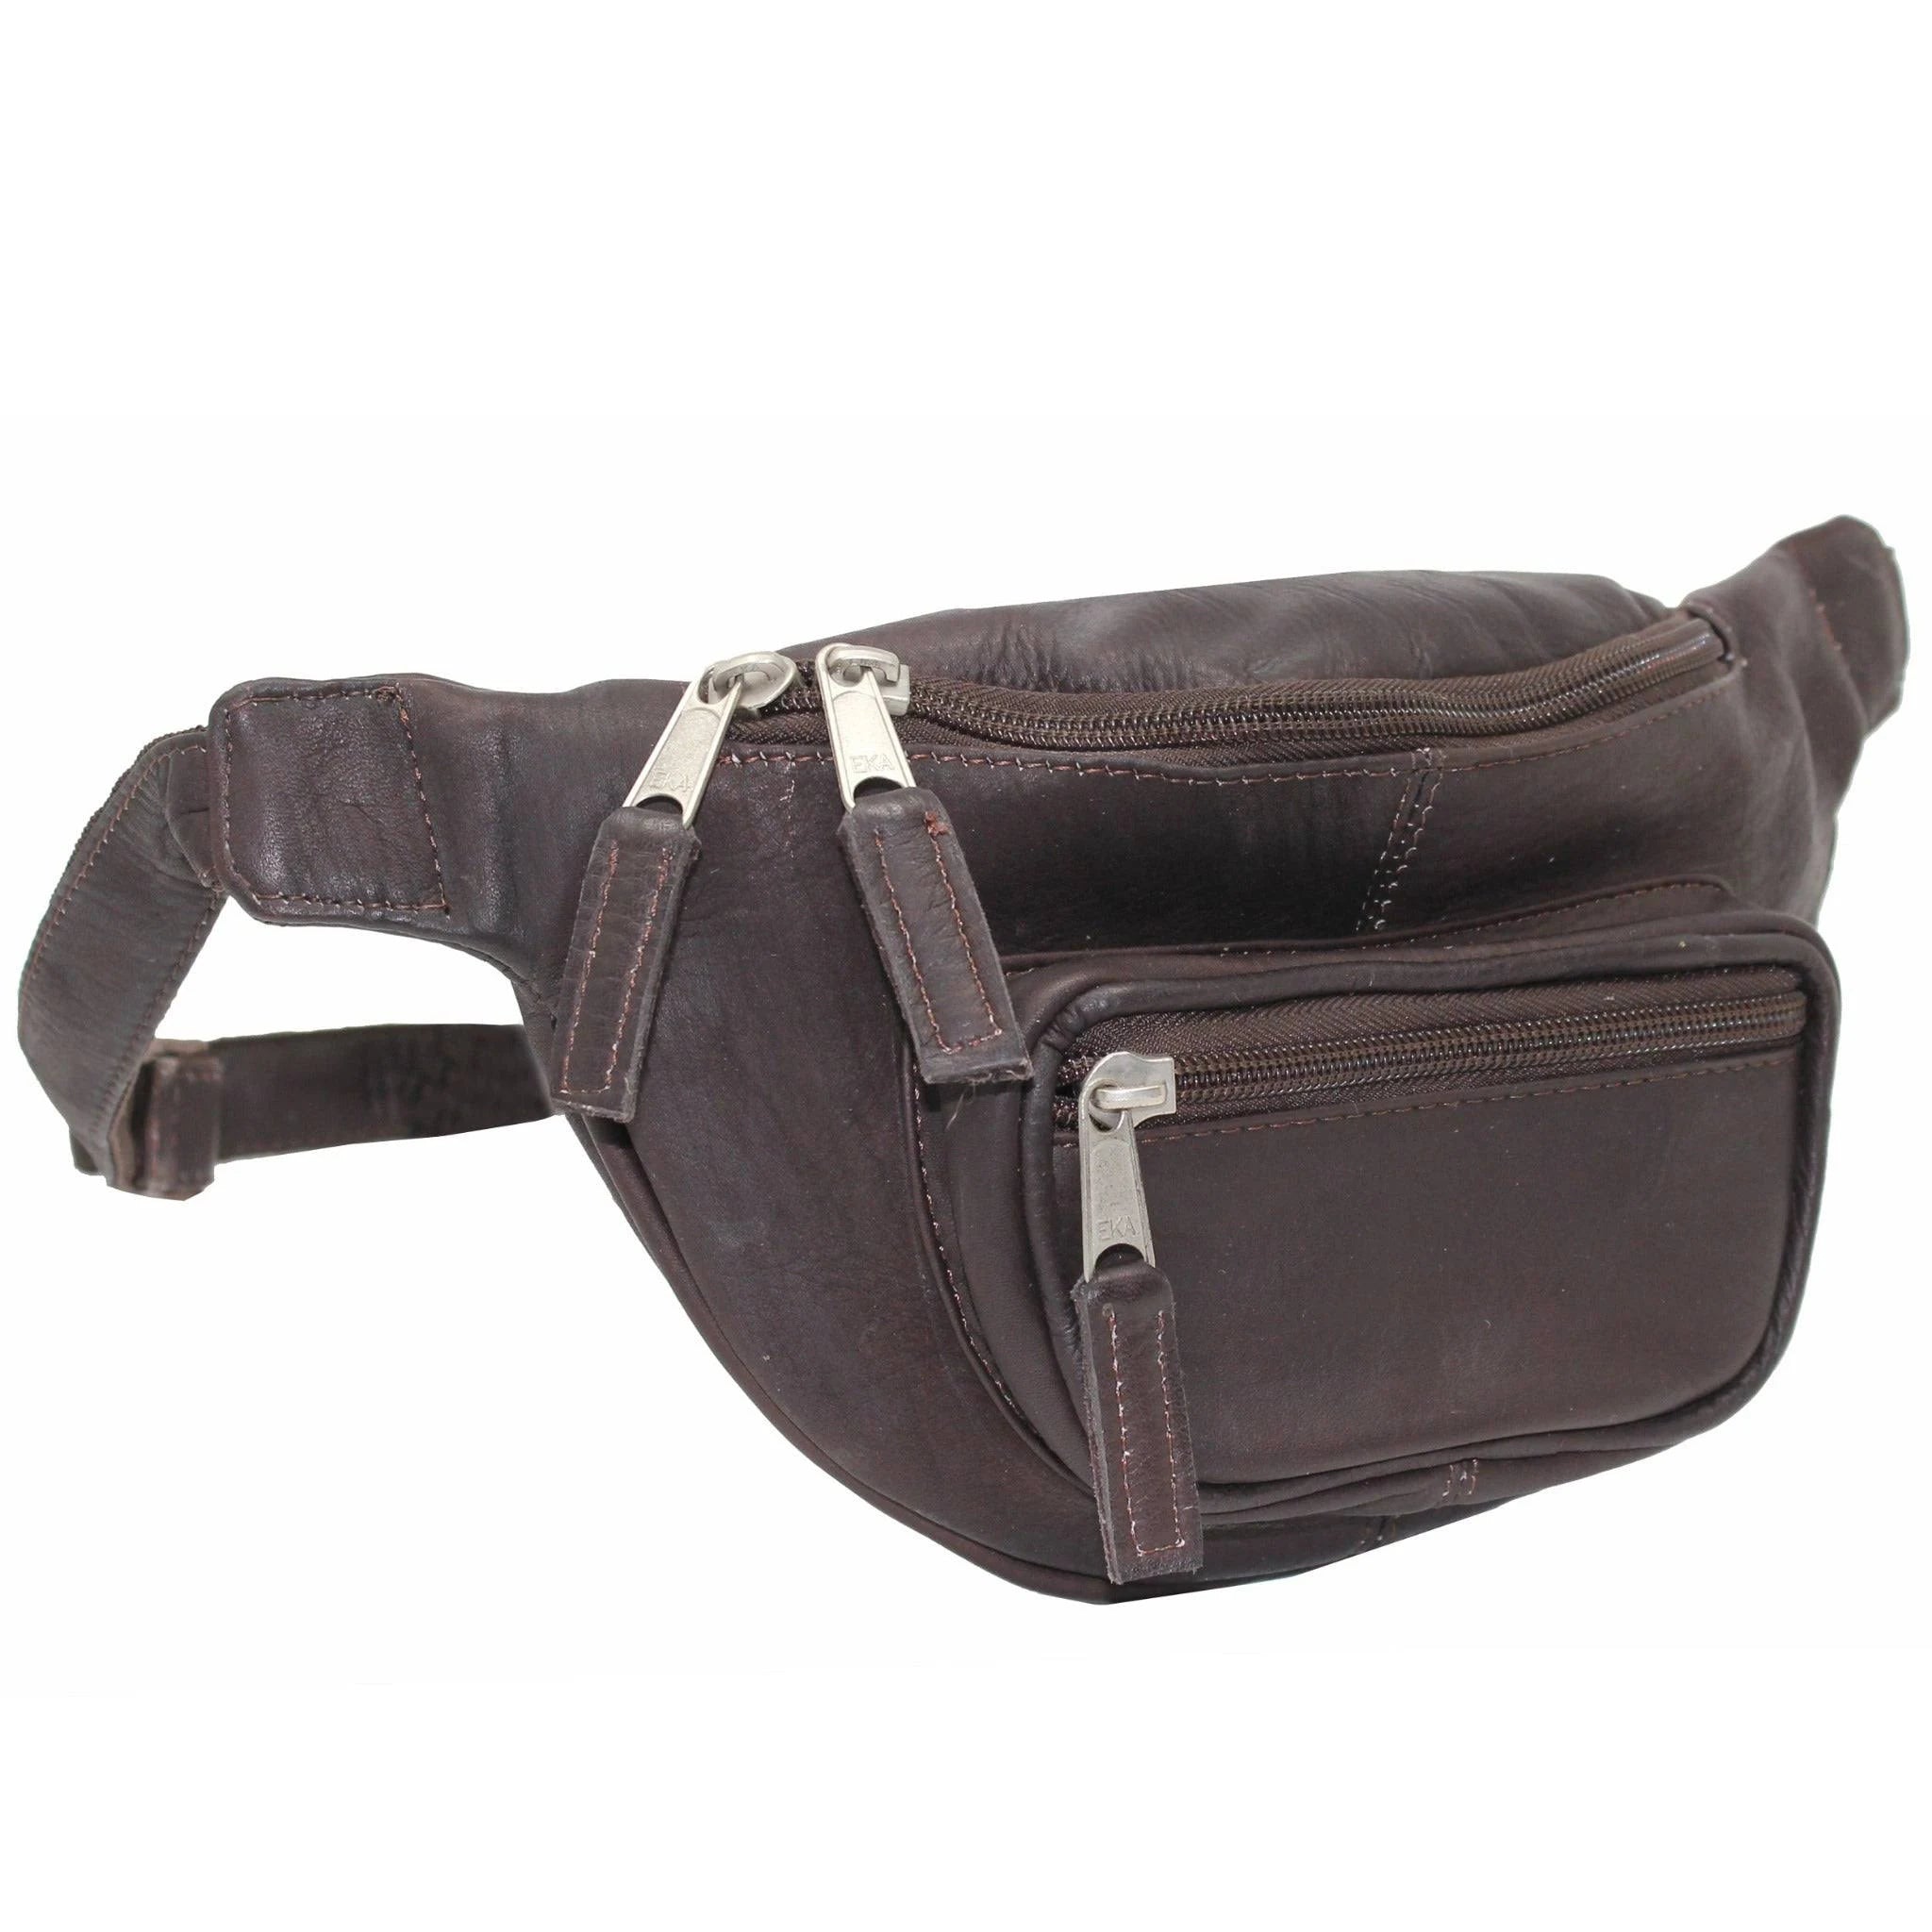 Leather heritage fanny pack/sling